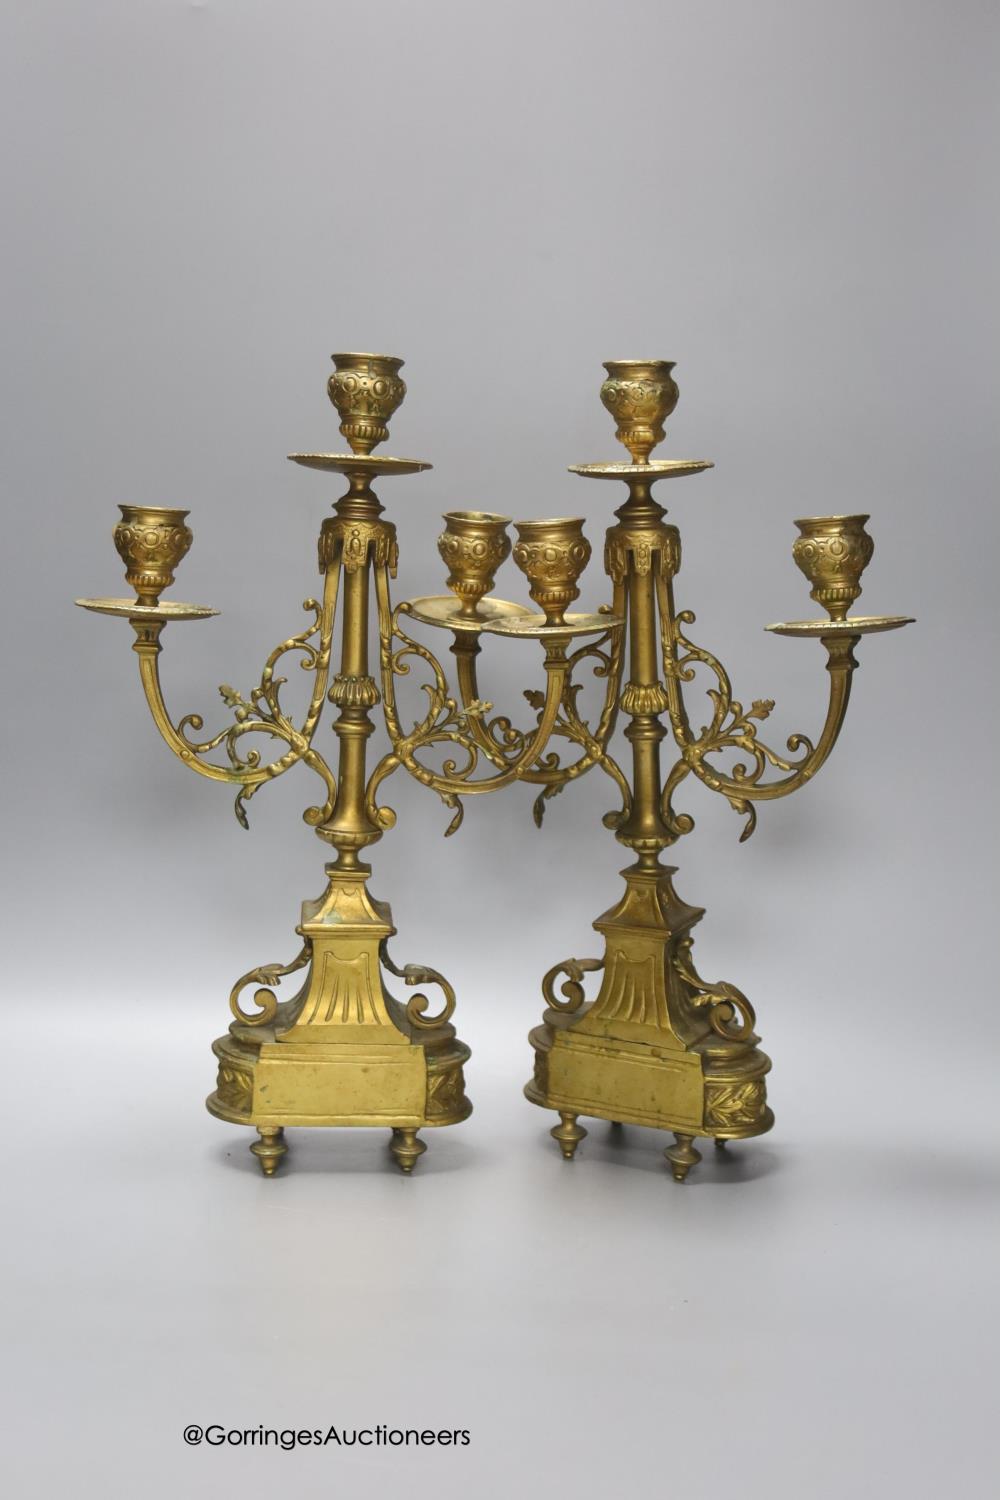 A pair of 19th century French ormolu candelabra, height 34cm - Image 2 of 3